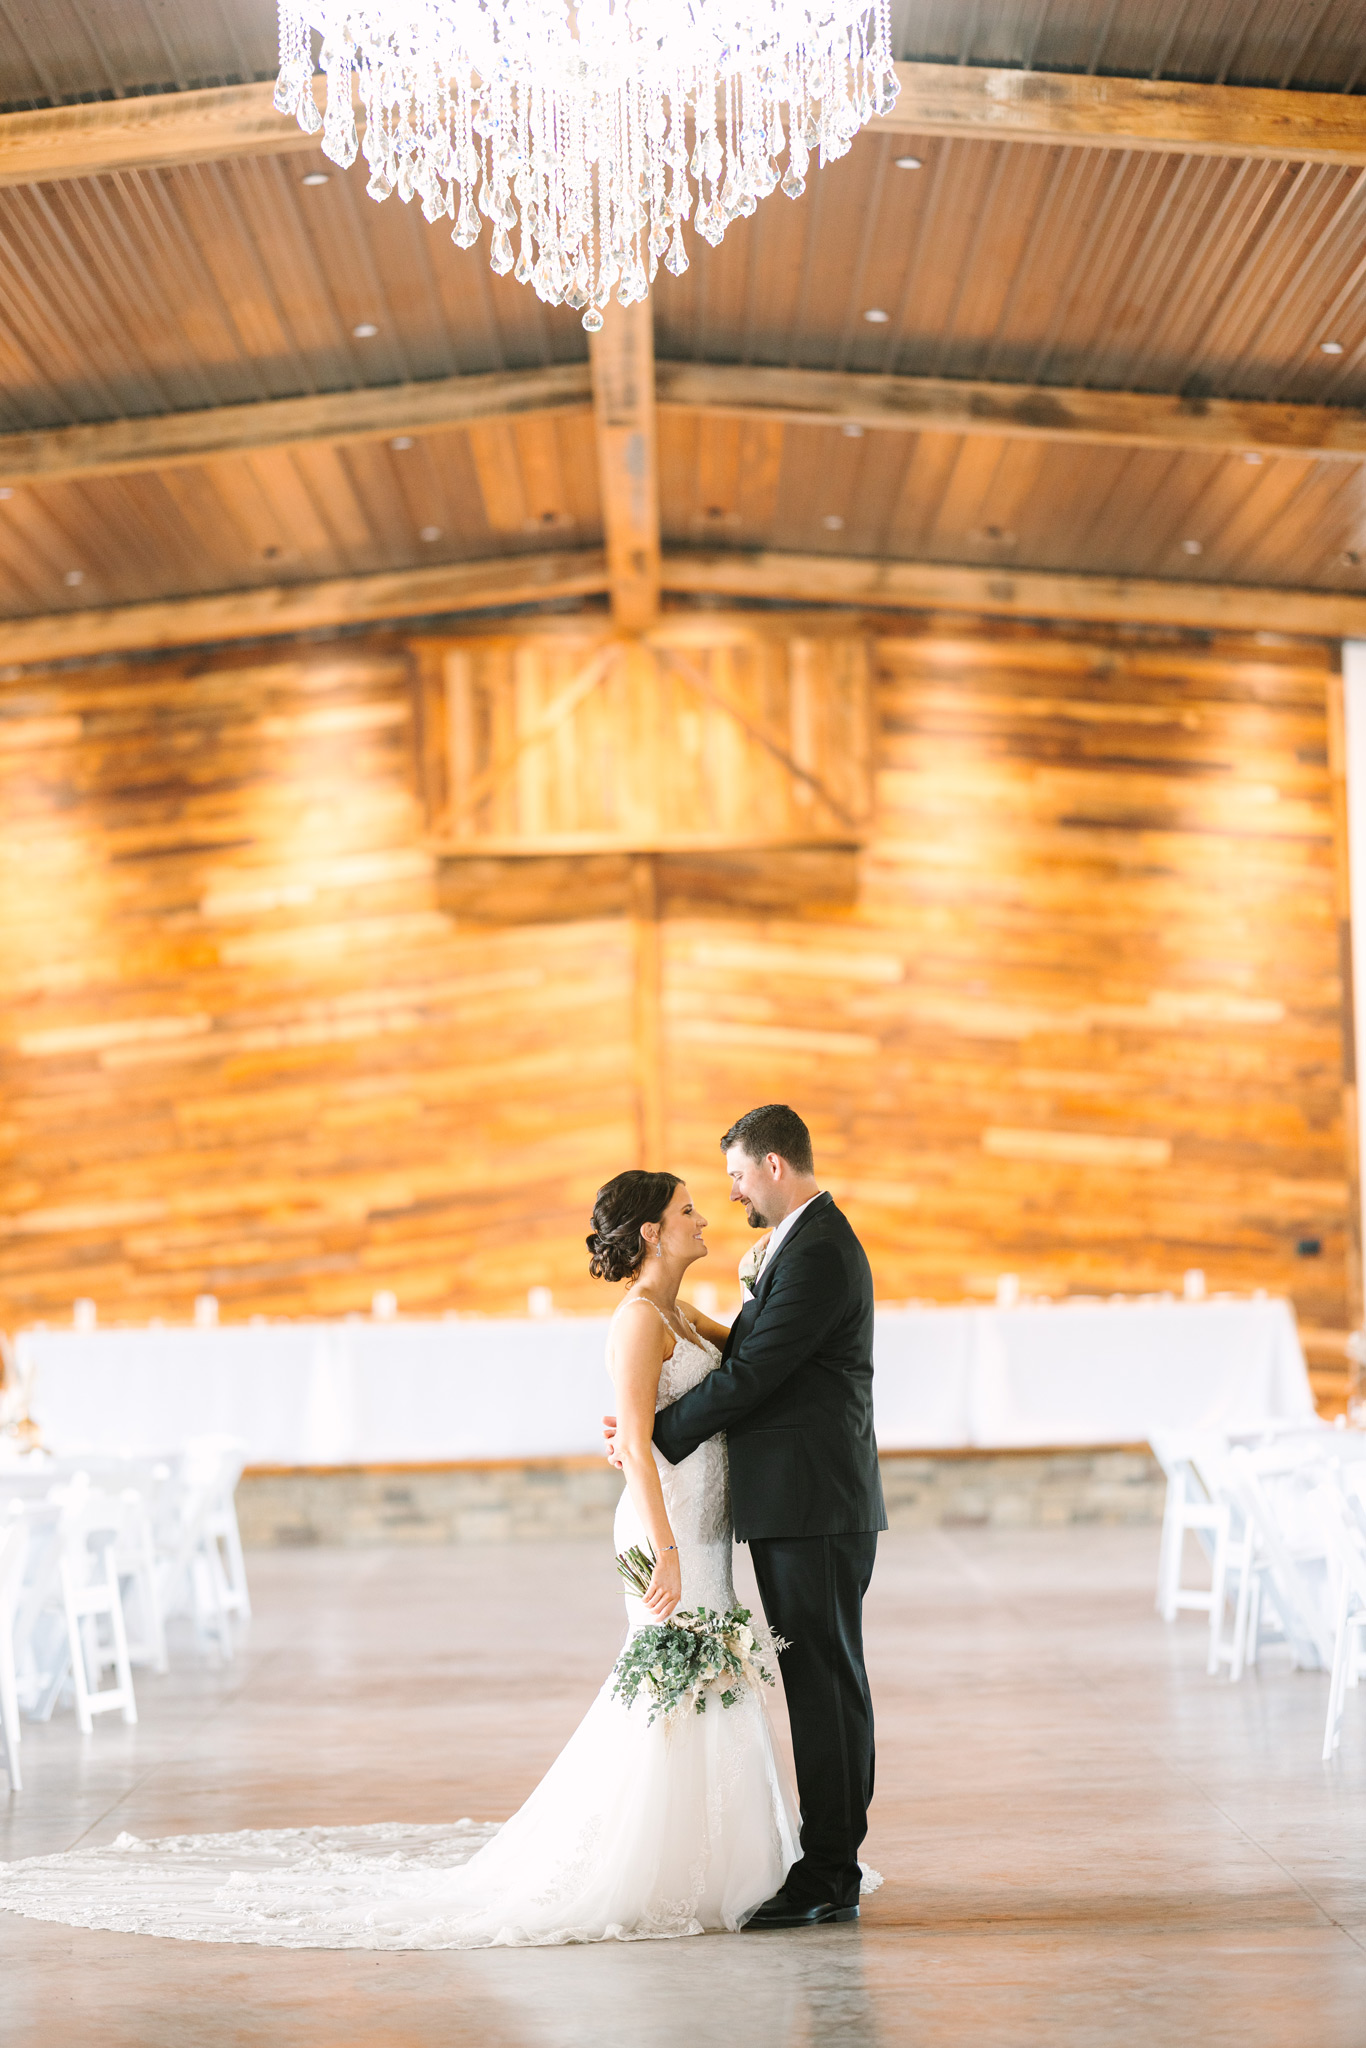 Bride and groom embrace each other in between white tables and chairs in front of a large wooden stage